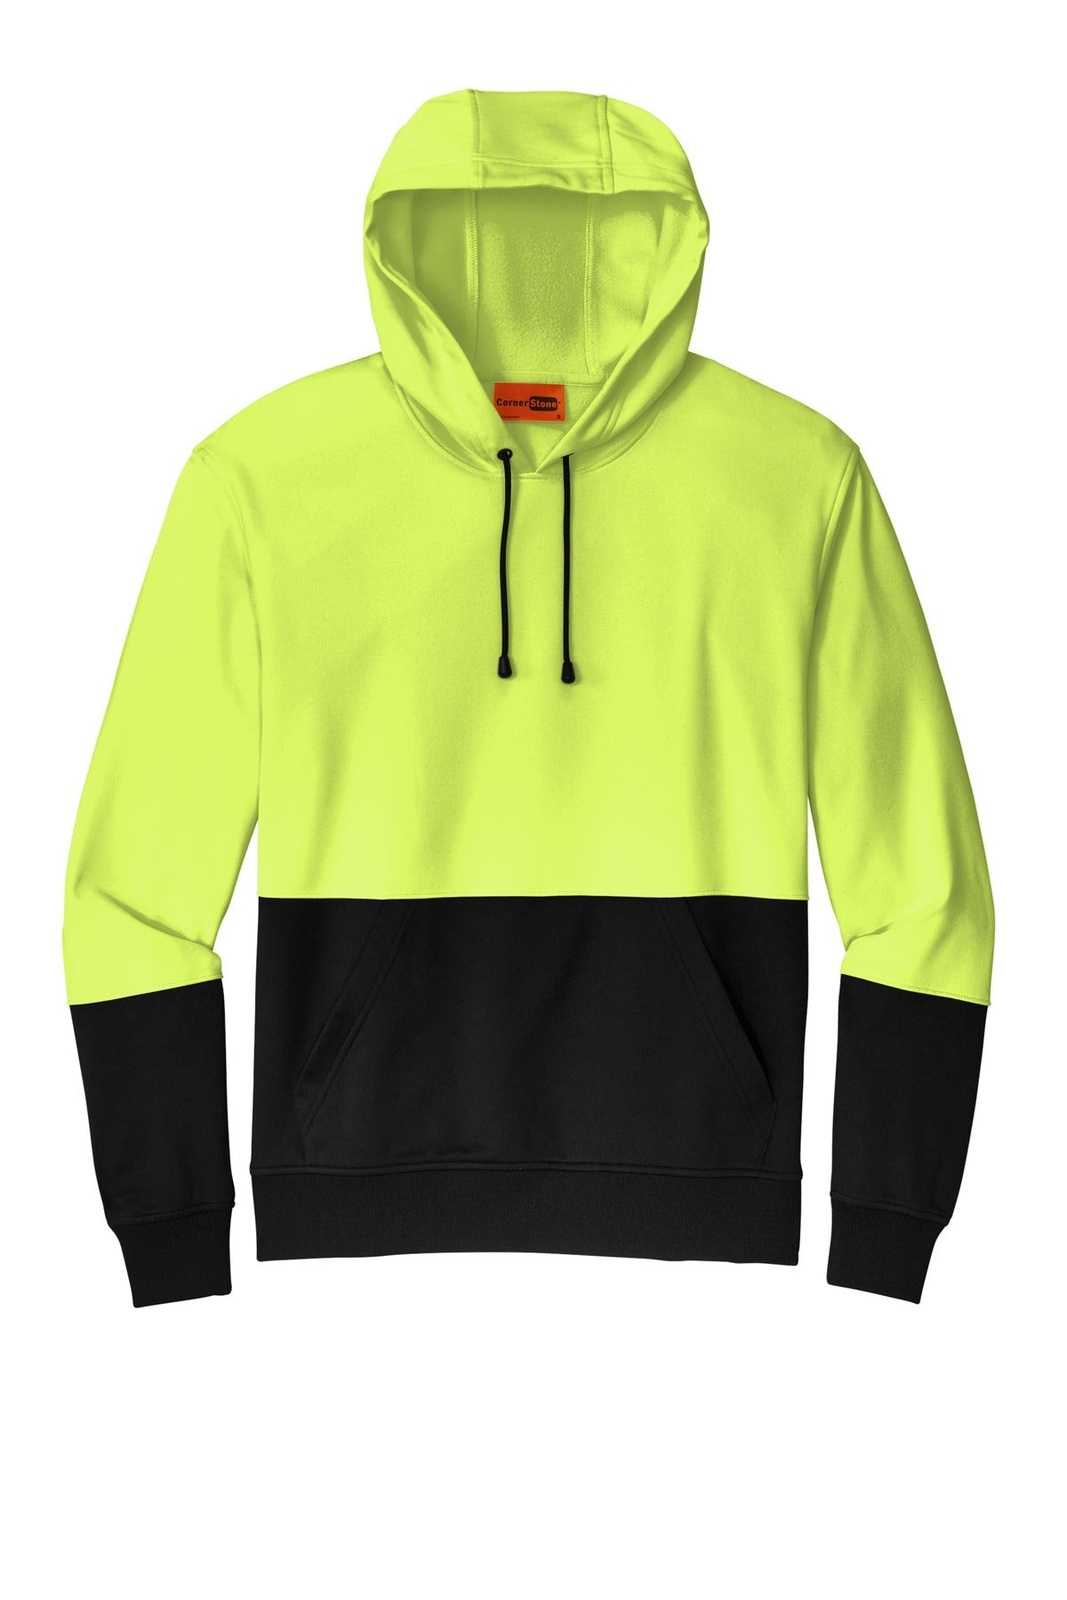 CornerStone CSF01 Enhanced Visibility Fleece Pullover Hoodie - Safety Yellow - HIT a Double - 2